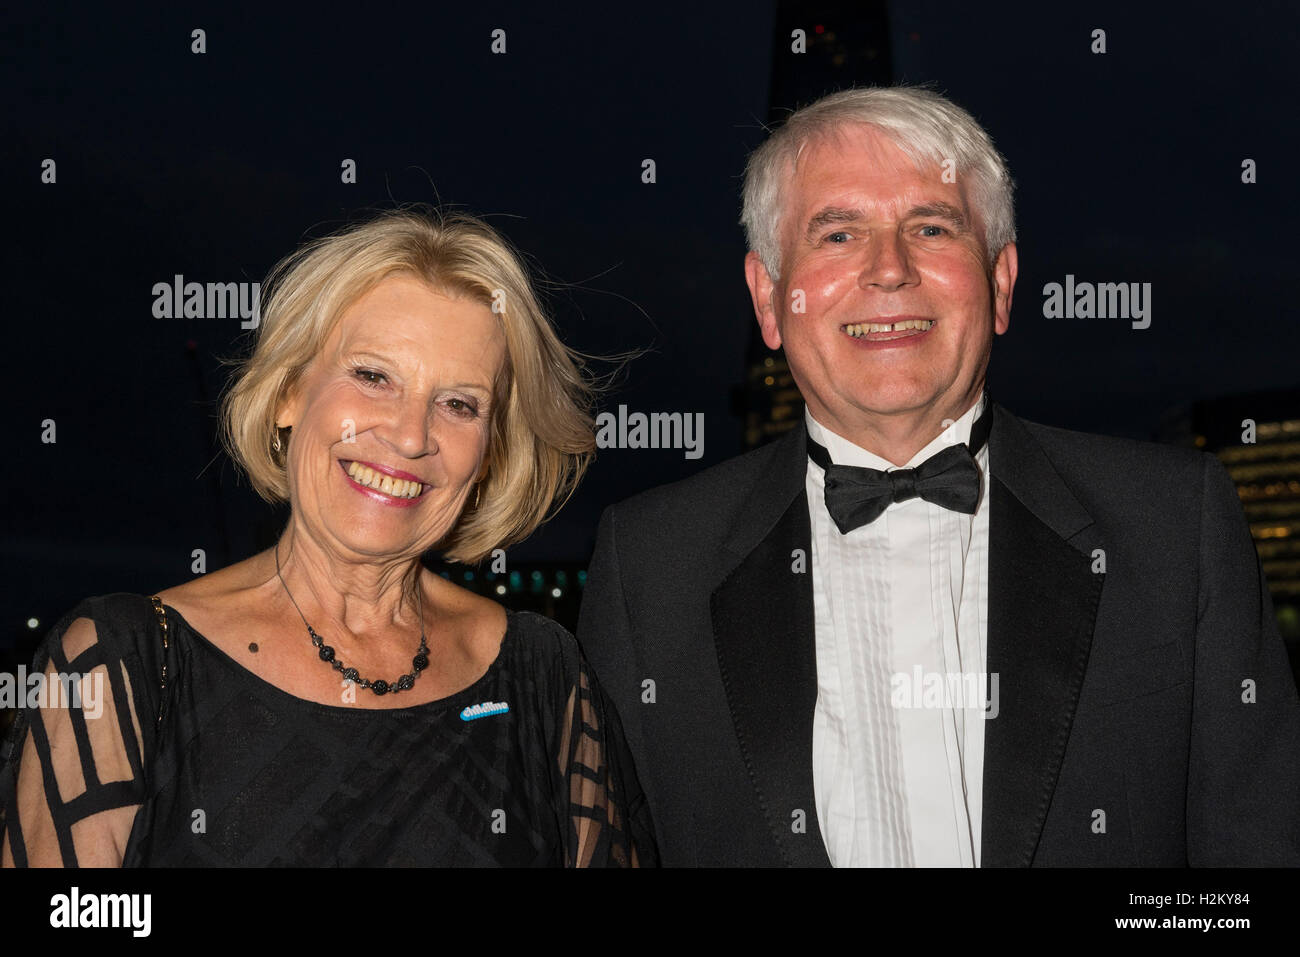 London, UK.  29 September 2016.   Former Great British Bake-Off contestant, Christine Wallace and partner attend the Childline Ball at Old Billingsgate Market to help celebrate 30 years of Childline.  This year's theme is The Great British Bake-Off. Credit:  Stephen Chung / Alamy Live News Stock Photo